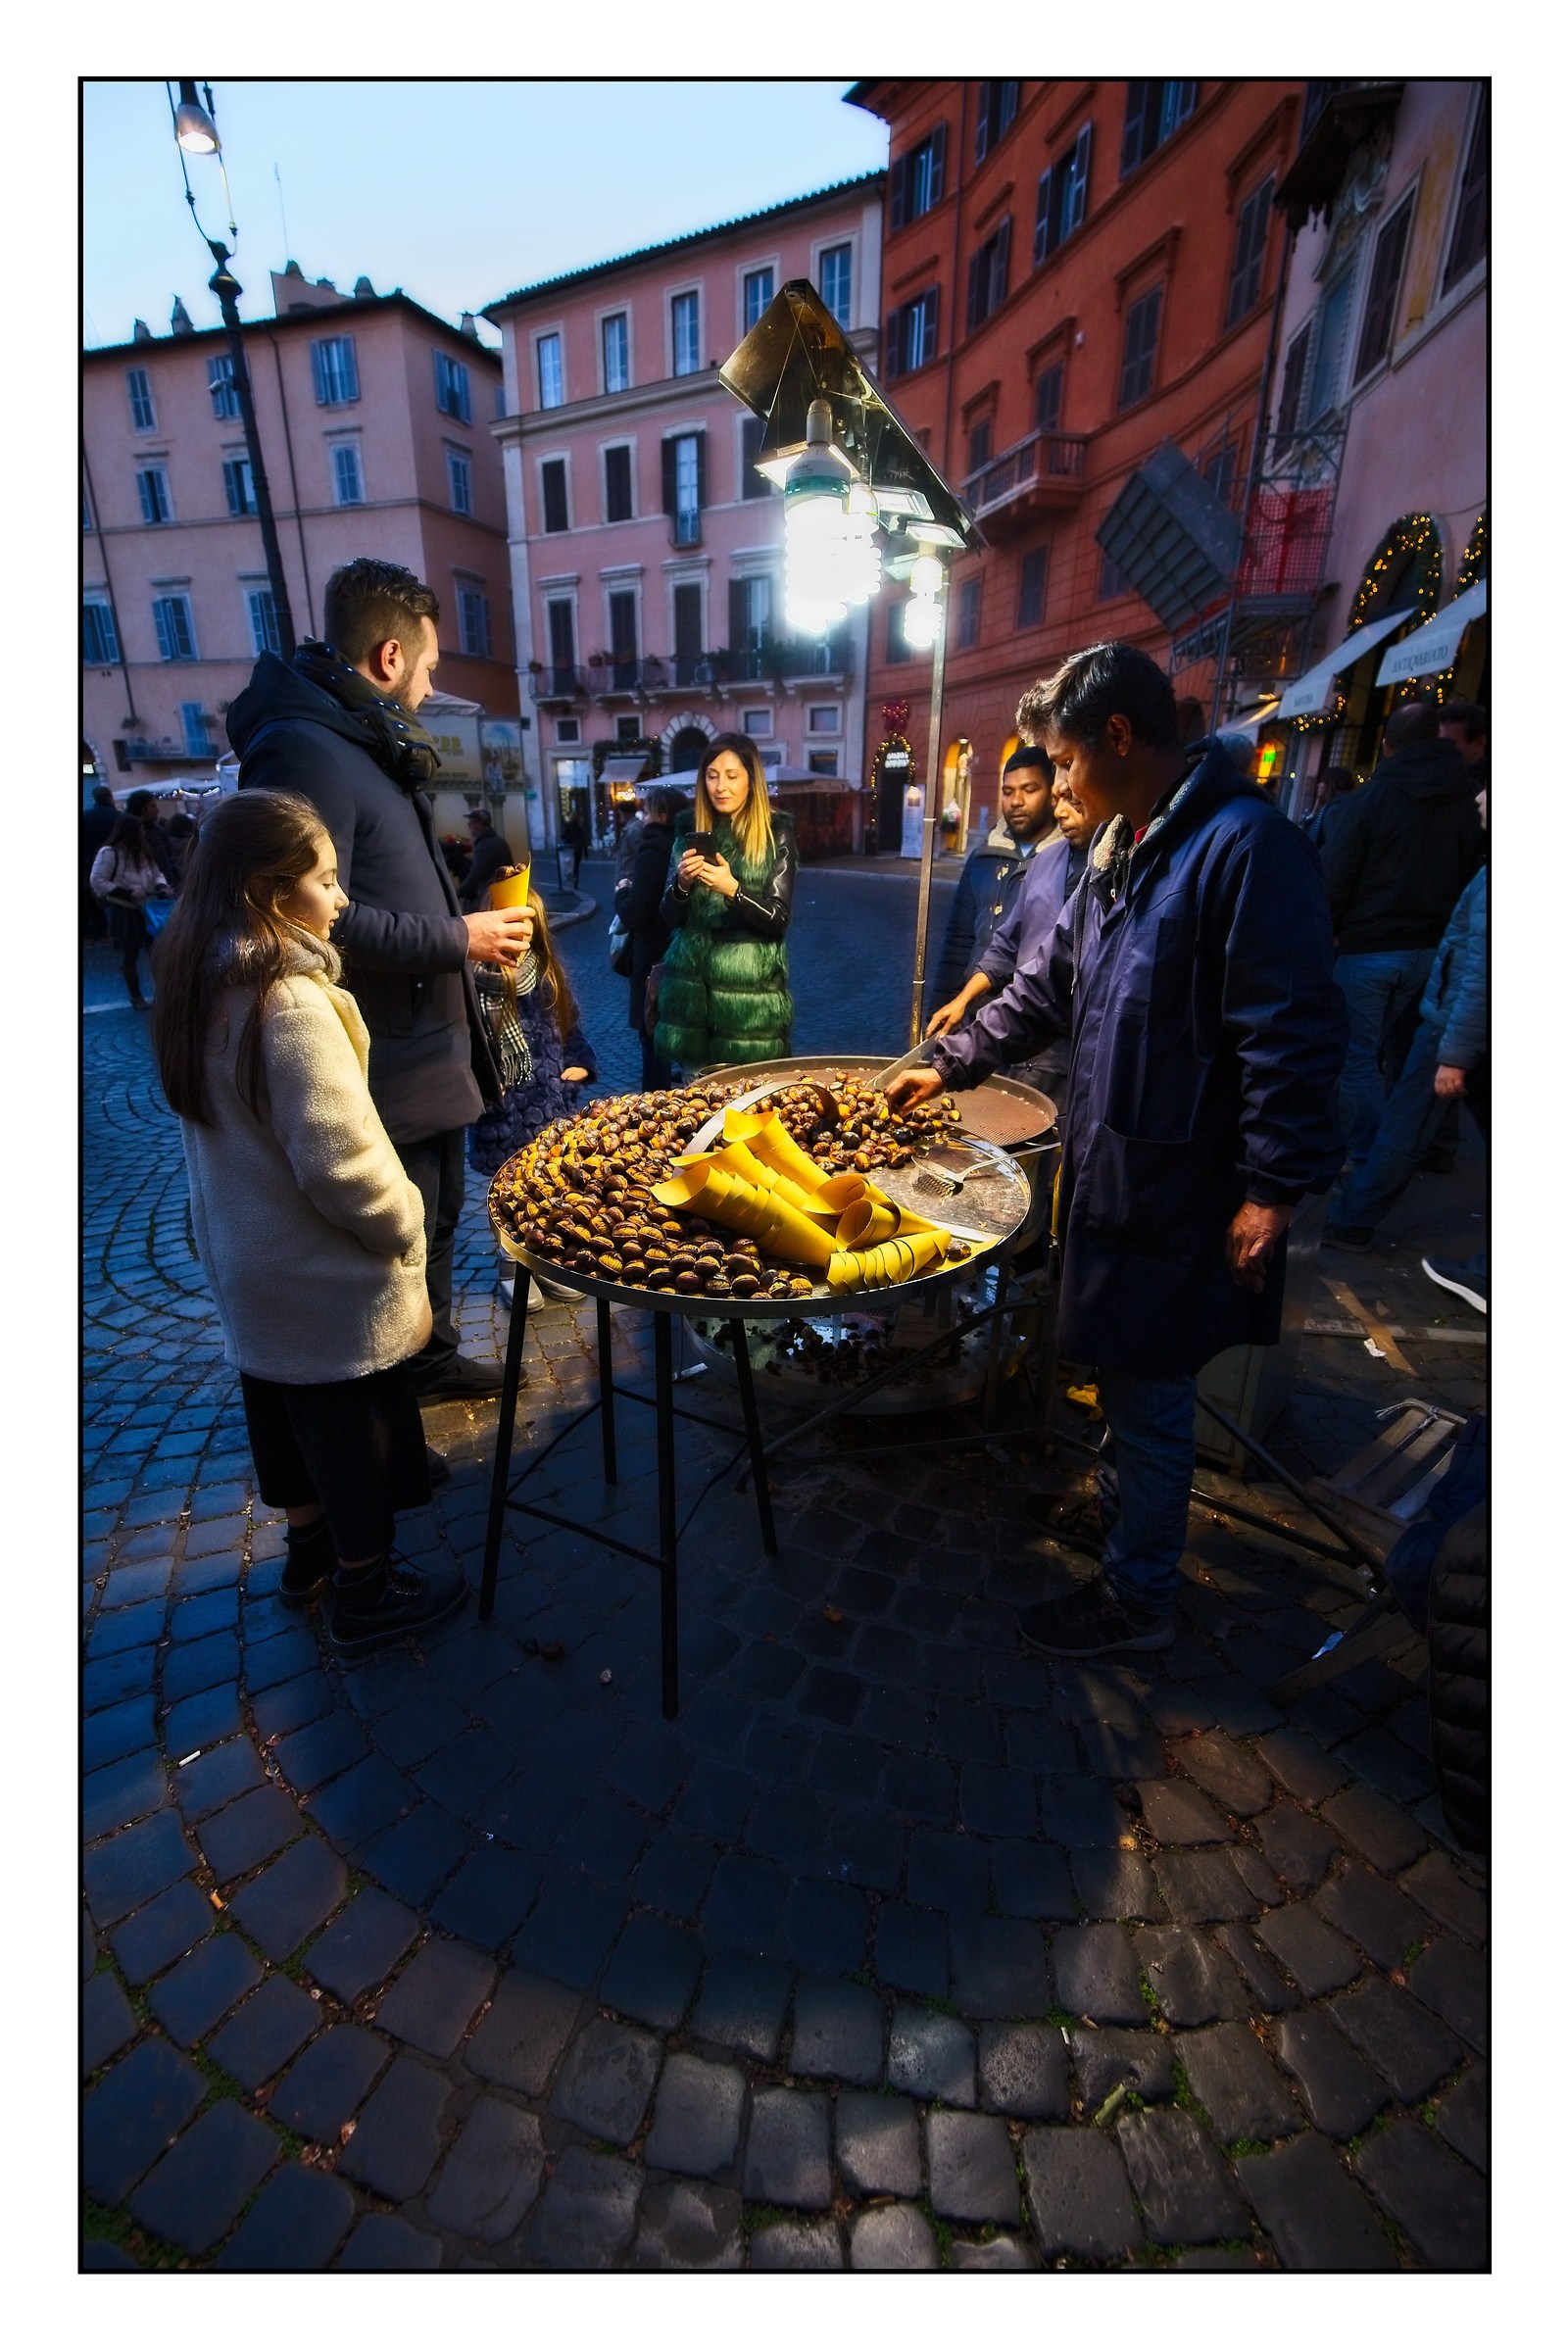 Roasted chestnuts in Piazza Navona...